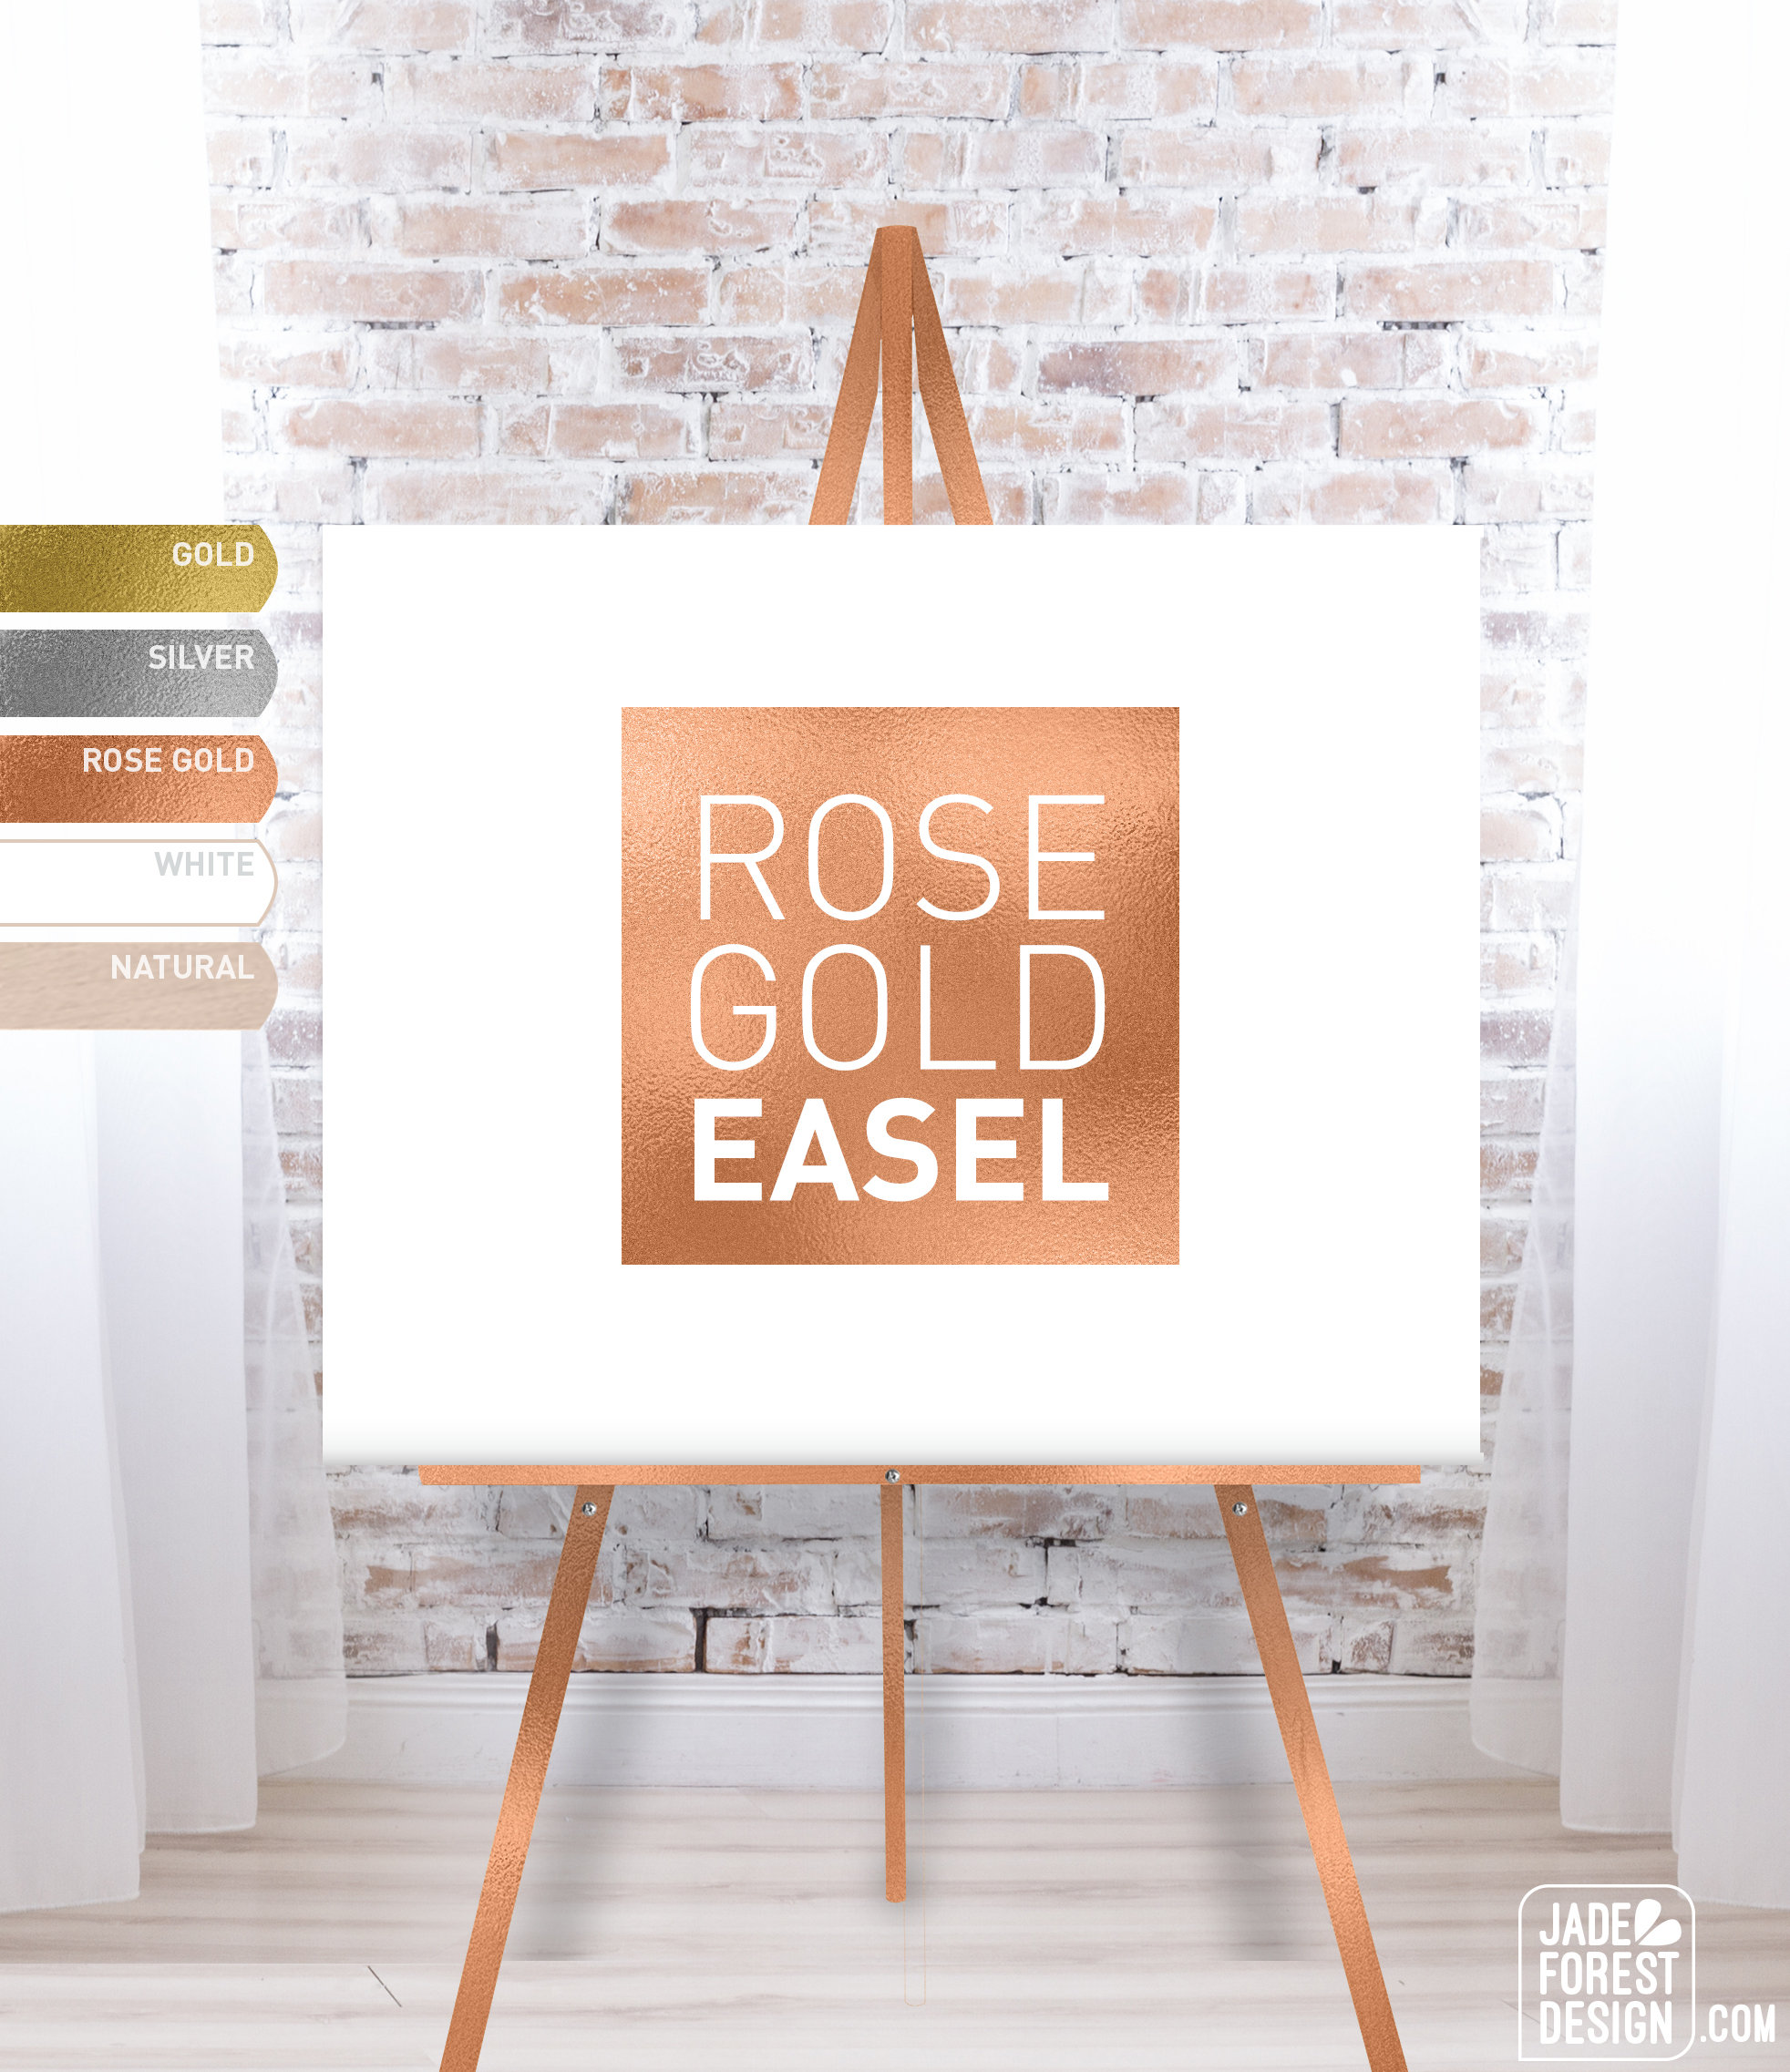  Easel for Wedding Welcome Sign, Display Floor Easel, Artist  Easel, 5 Color Options, Natural Wood, Gold, Rose Gold, Silver, White,  Black, 65 Inches, Made in The USA